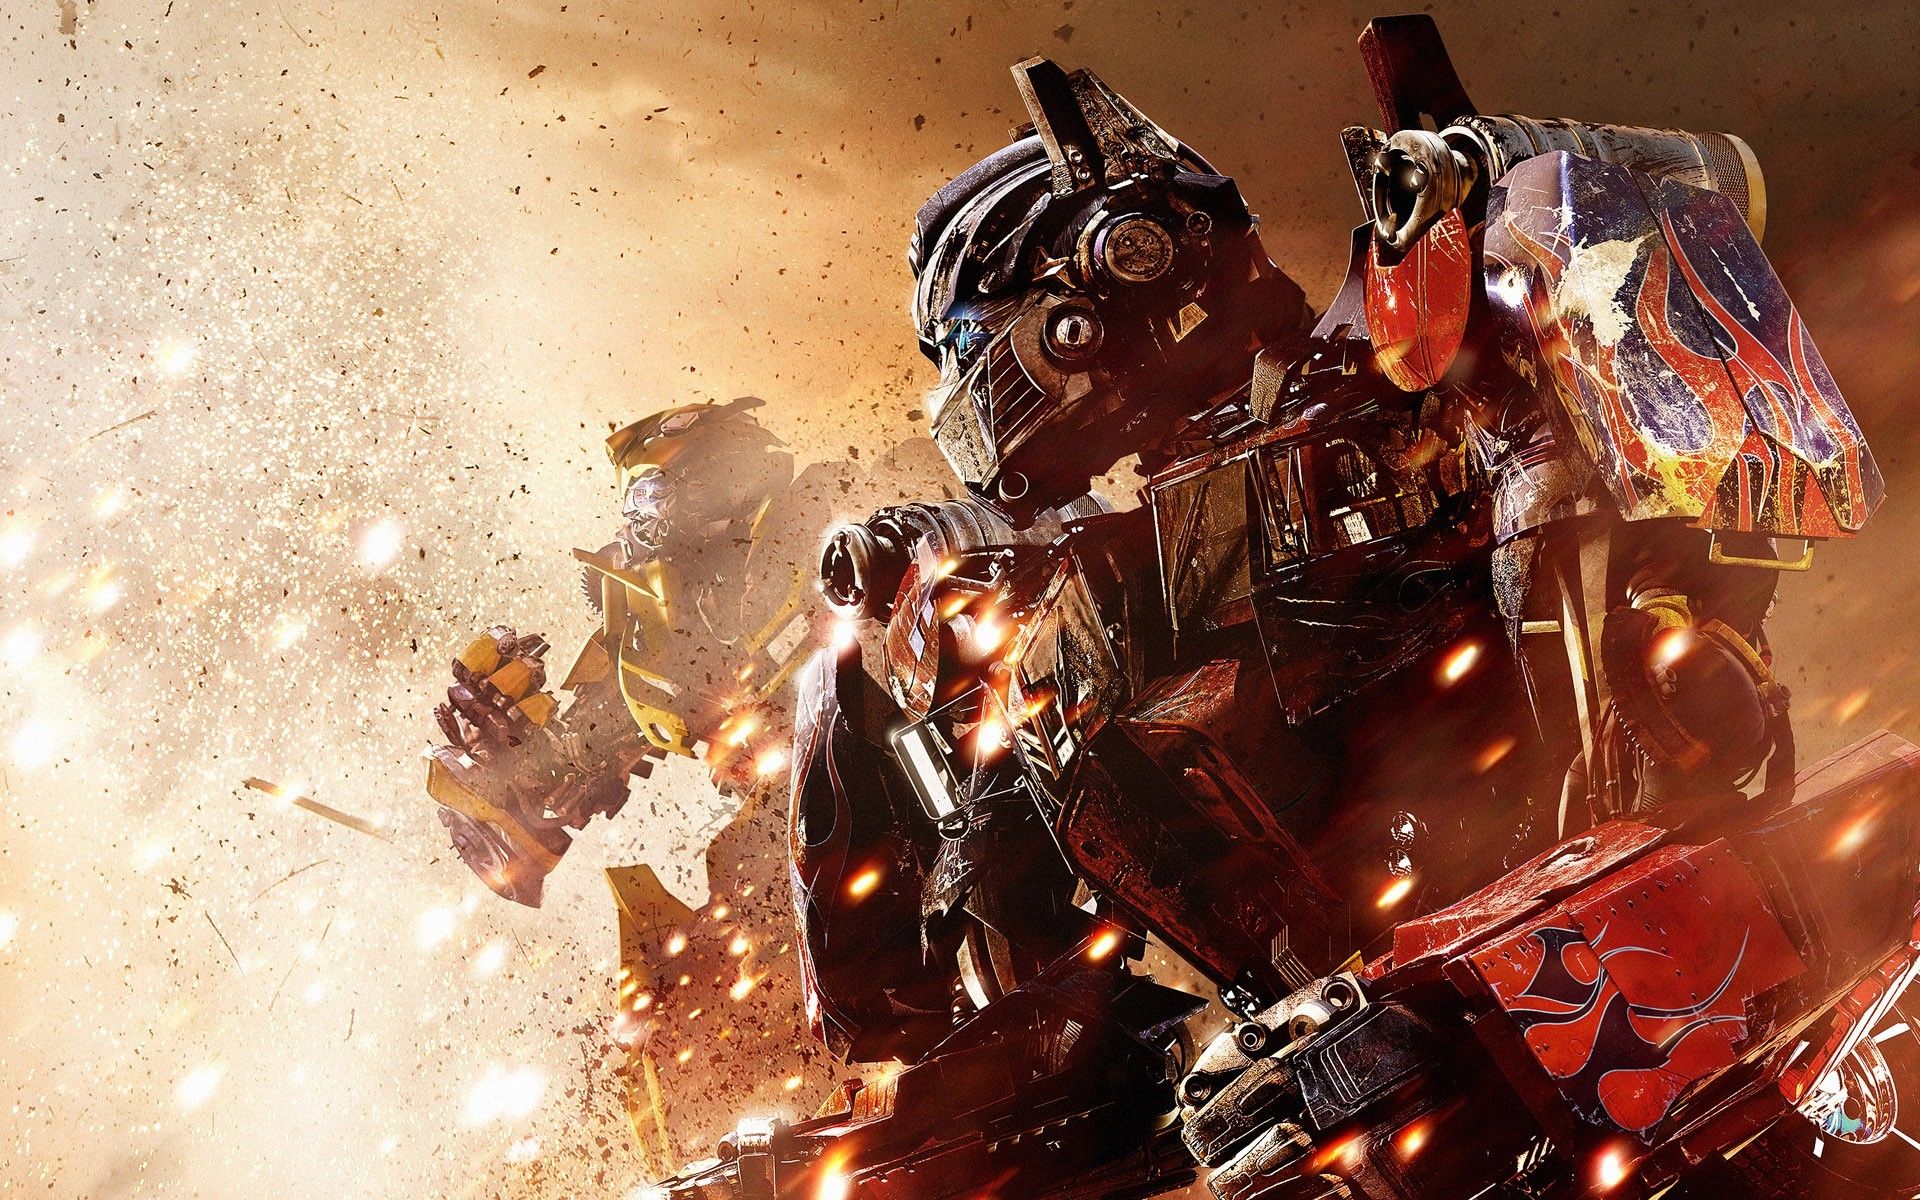 31 Epic Wallpapers Featuring Robots, Mechs, And Similar Badassery ...